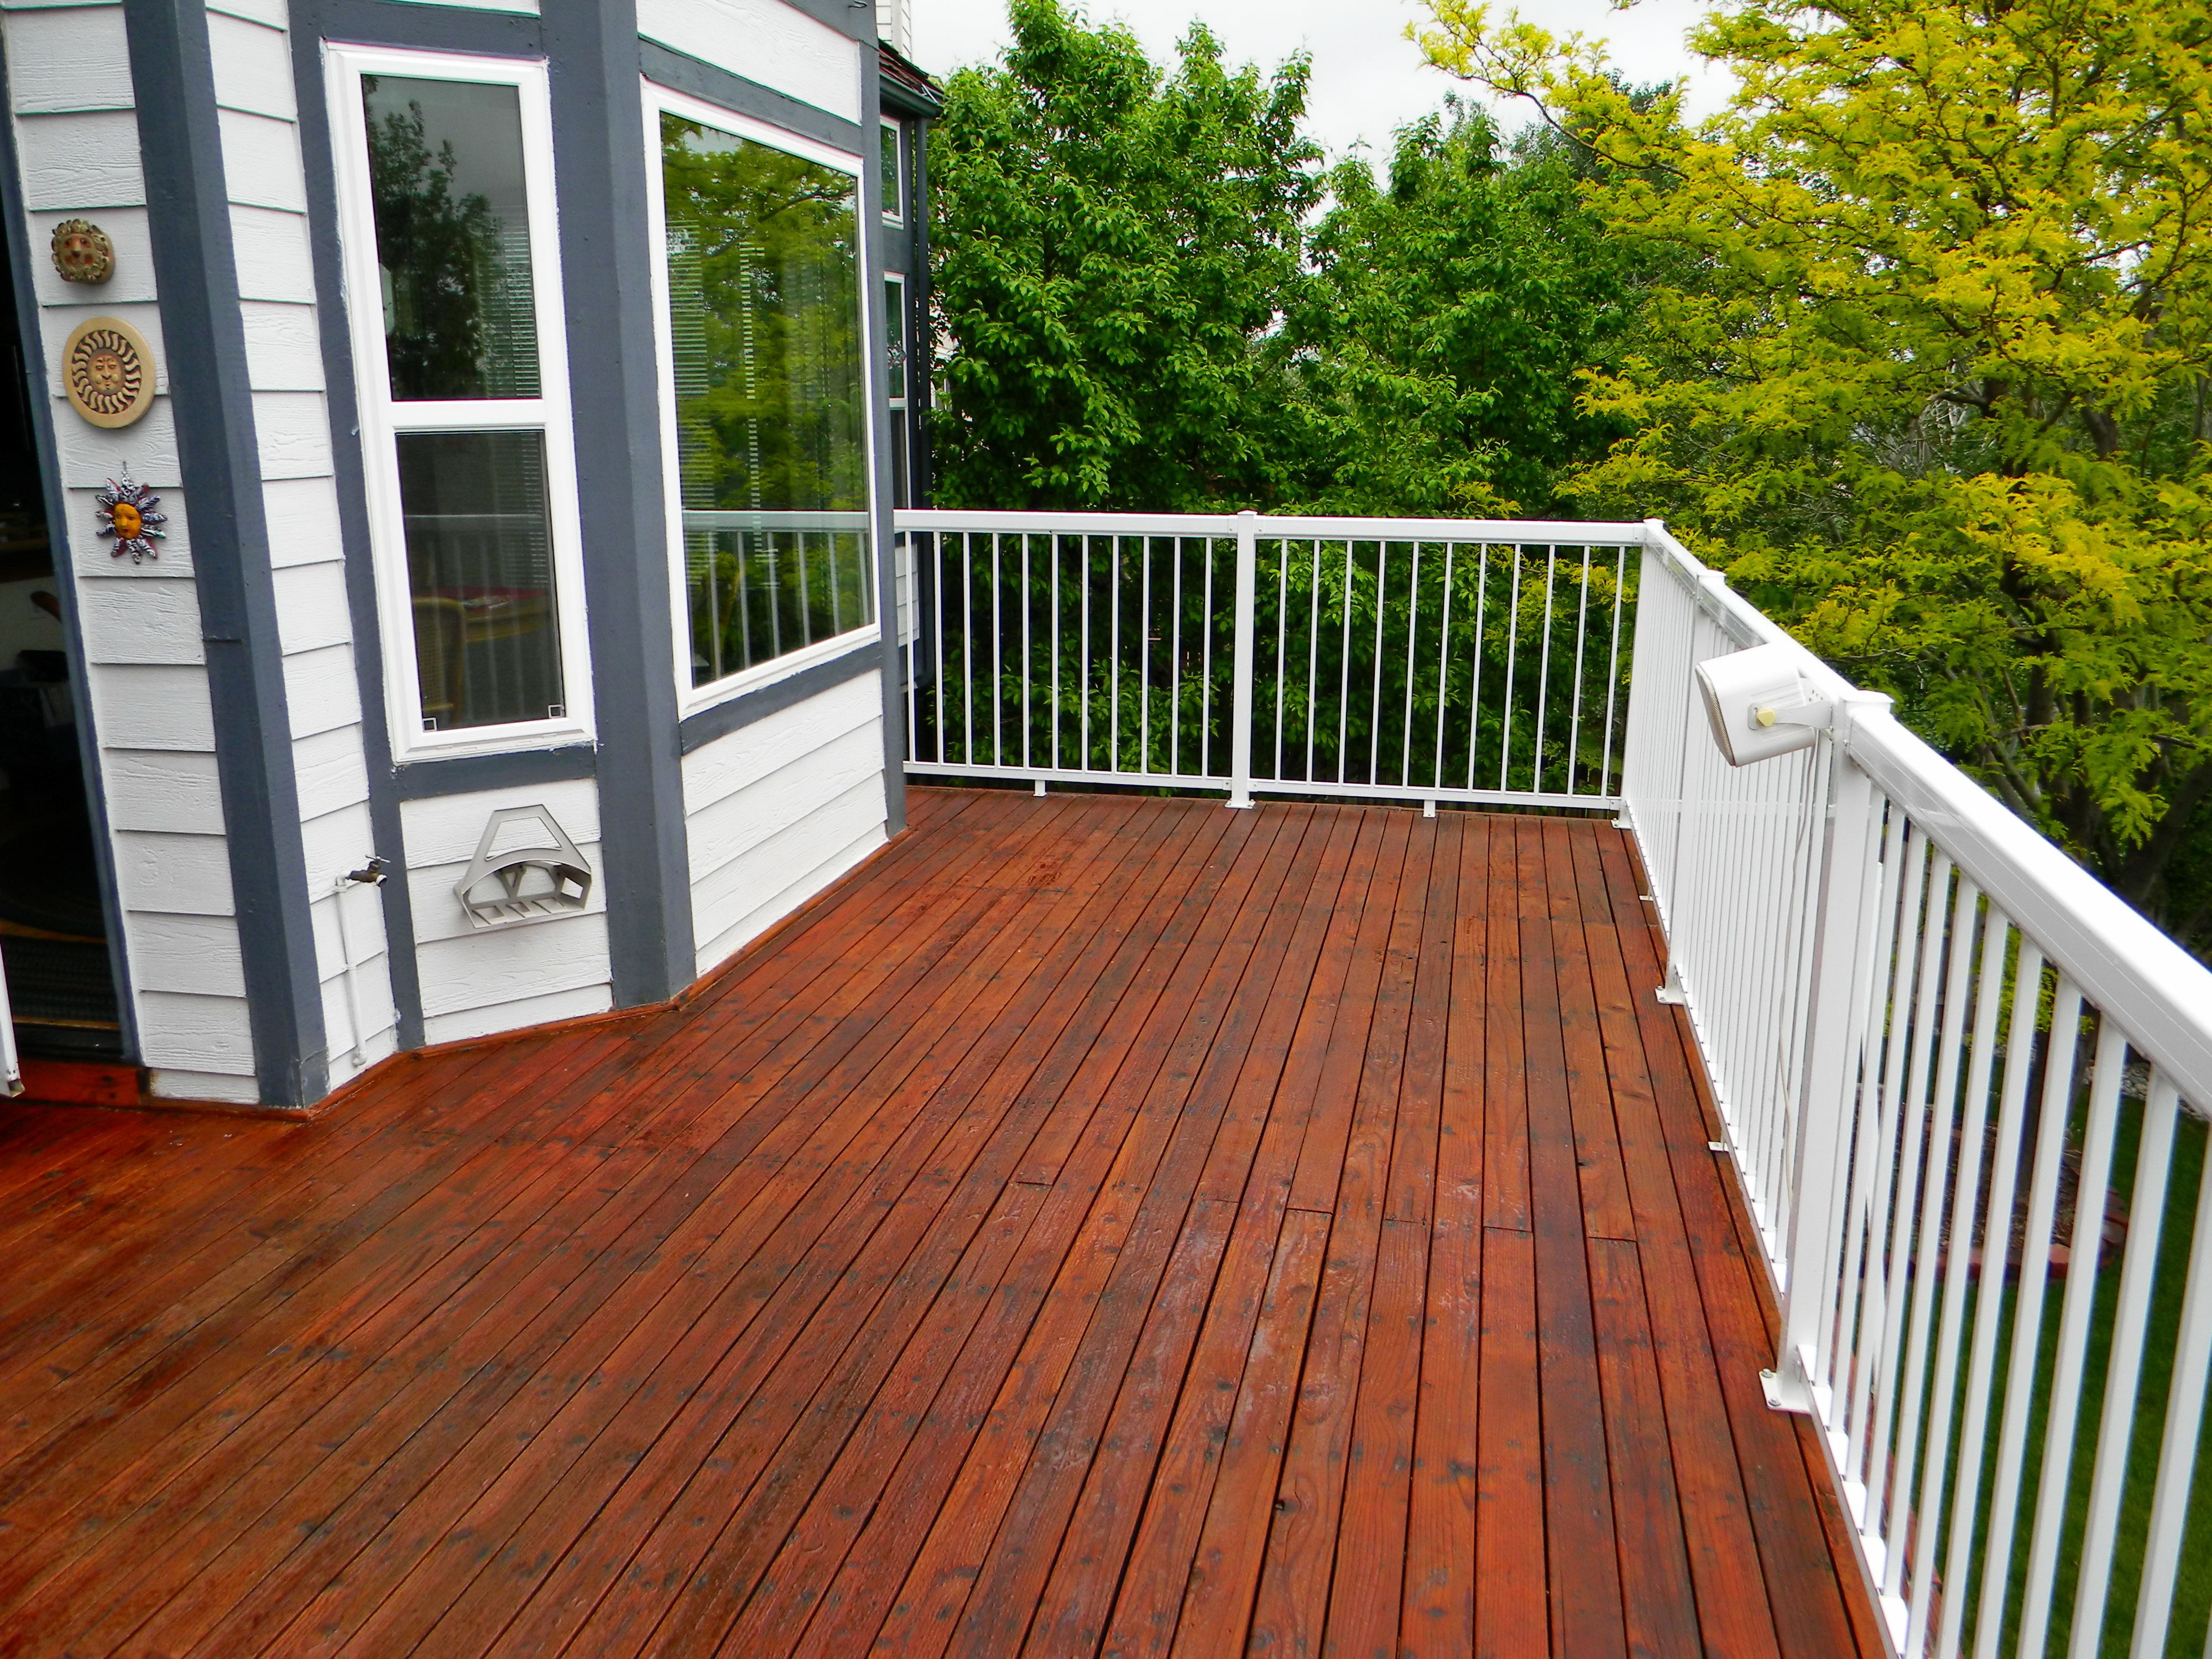 Refinished Deck Stained With Ready Seal Mahogany Our Deck And within size 4000 X 3000